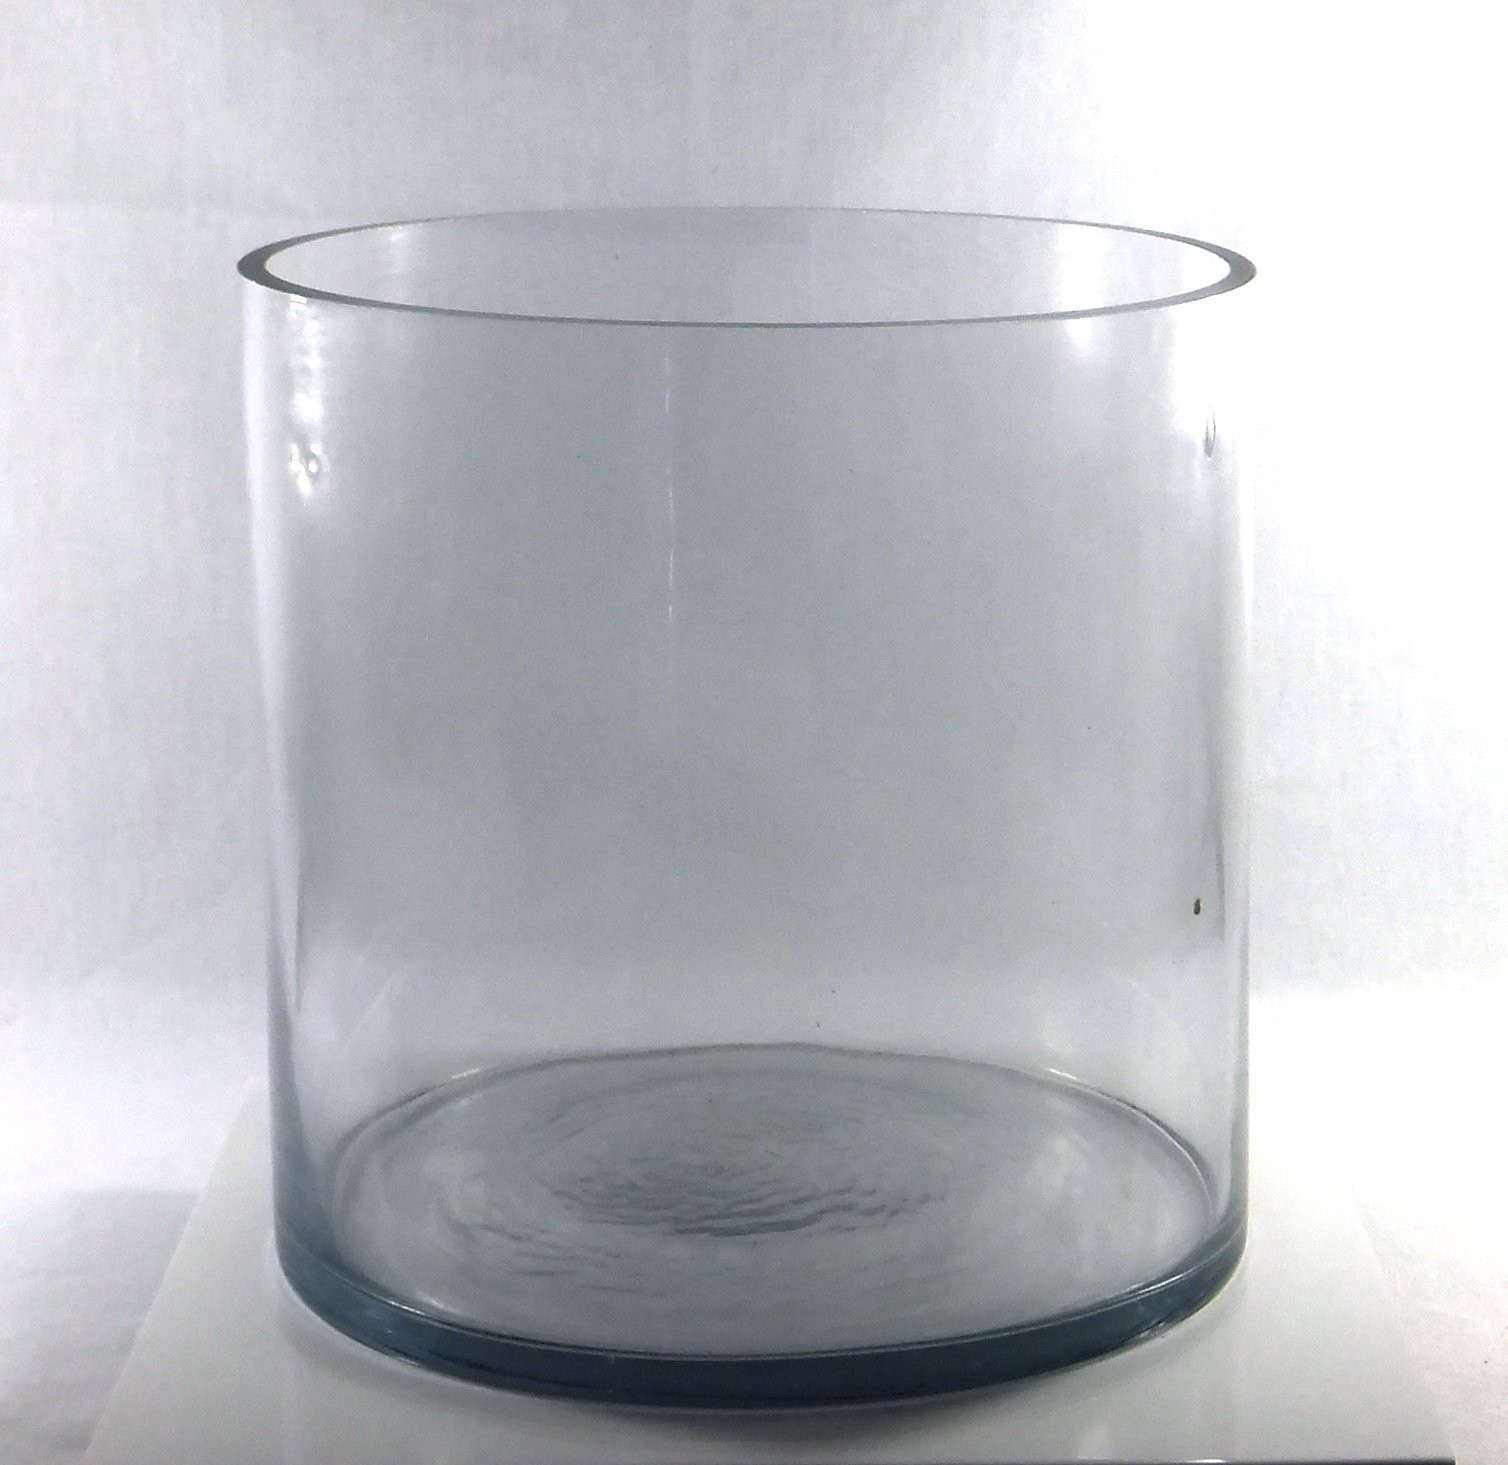 29 Lovable Clear Plastic Beads for Vases 2024 free download clear plastic beads for vases of buy 8 inch round large glass vase 8 clear cylinder oversize in 8 inch round large glass vase 8 clear cylinder oversize centerpiece 8x8